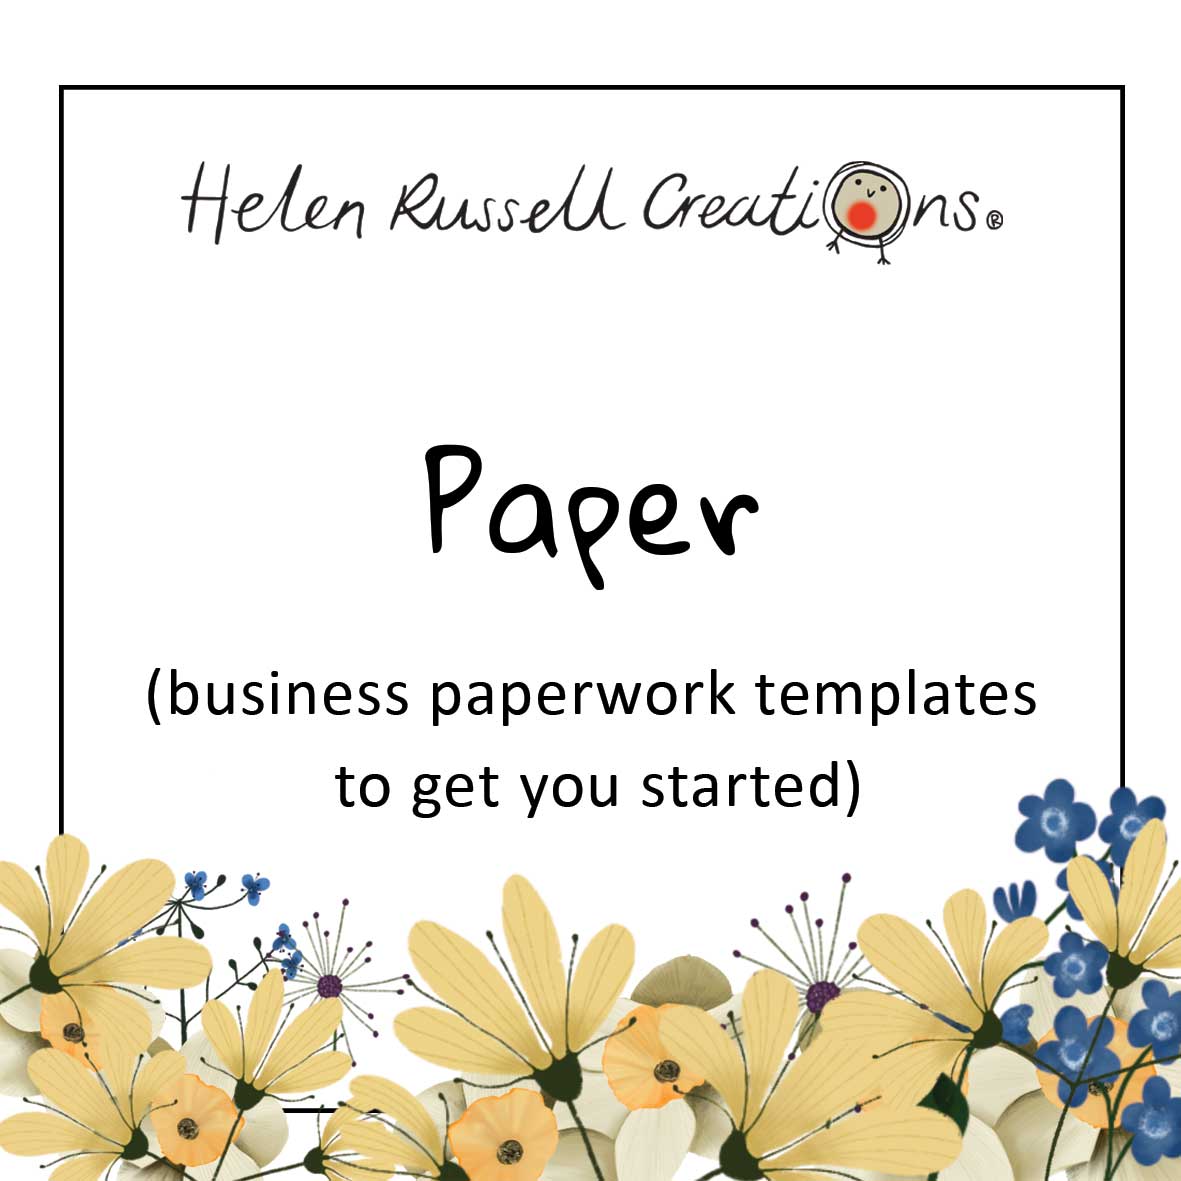 Paper, business paperwork templates to get you started